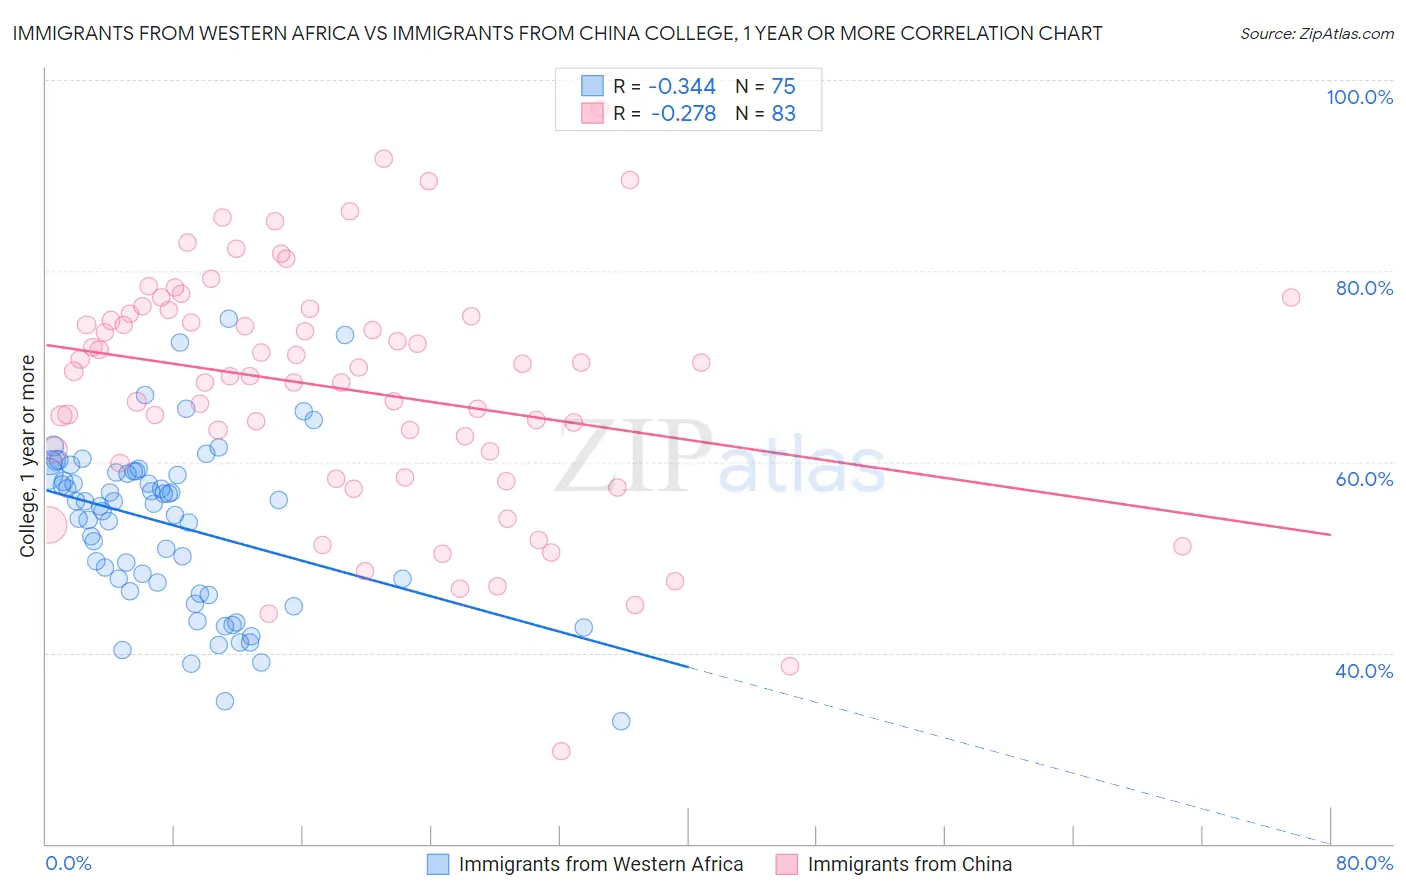 Immigrants from Western Africa vs Immigrants from China College, 1 year or more